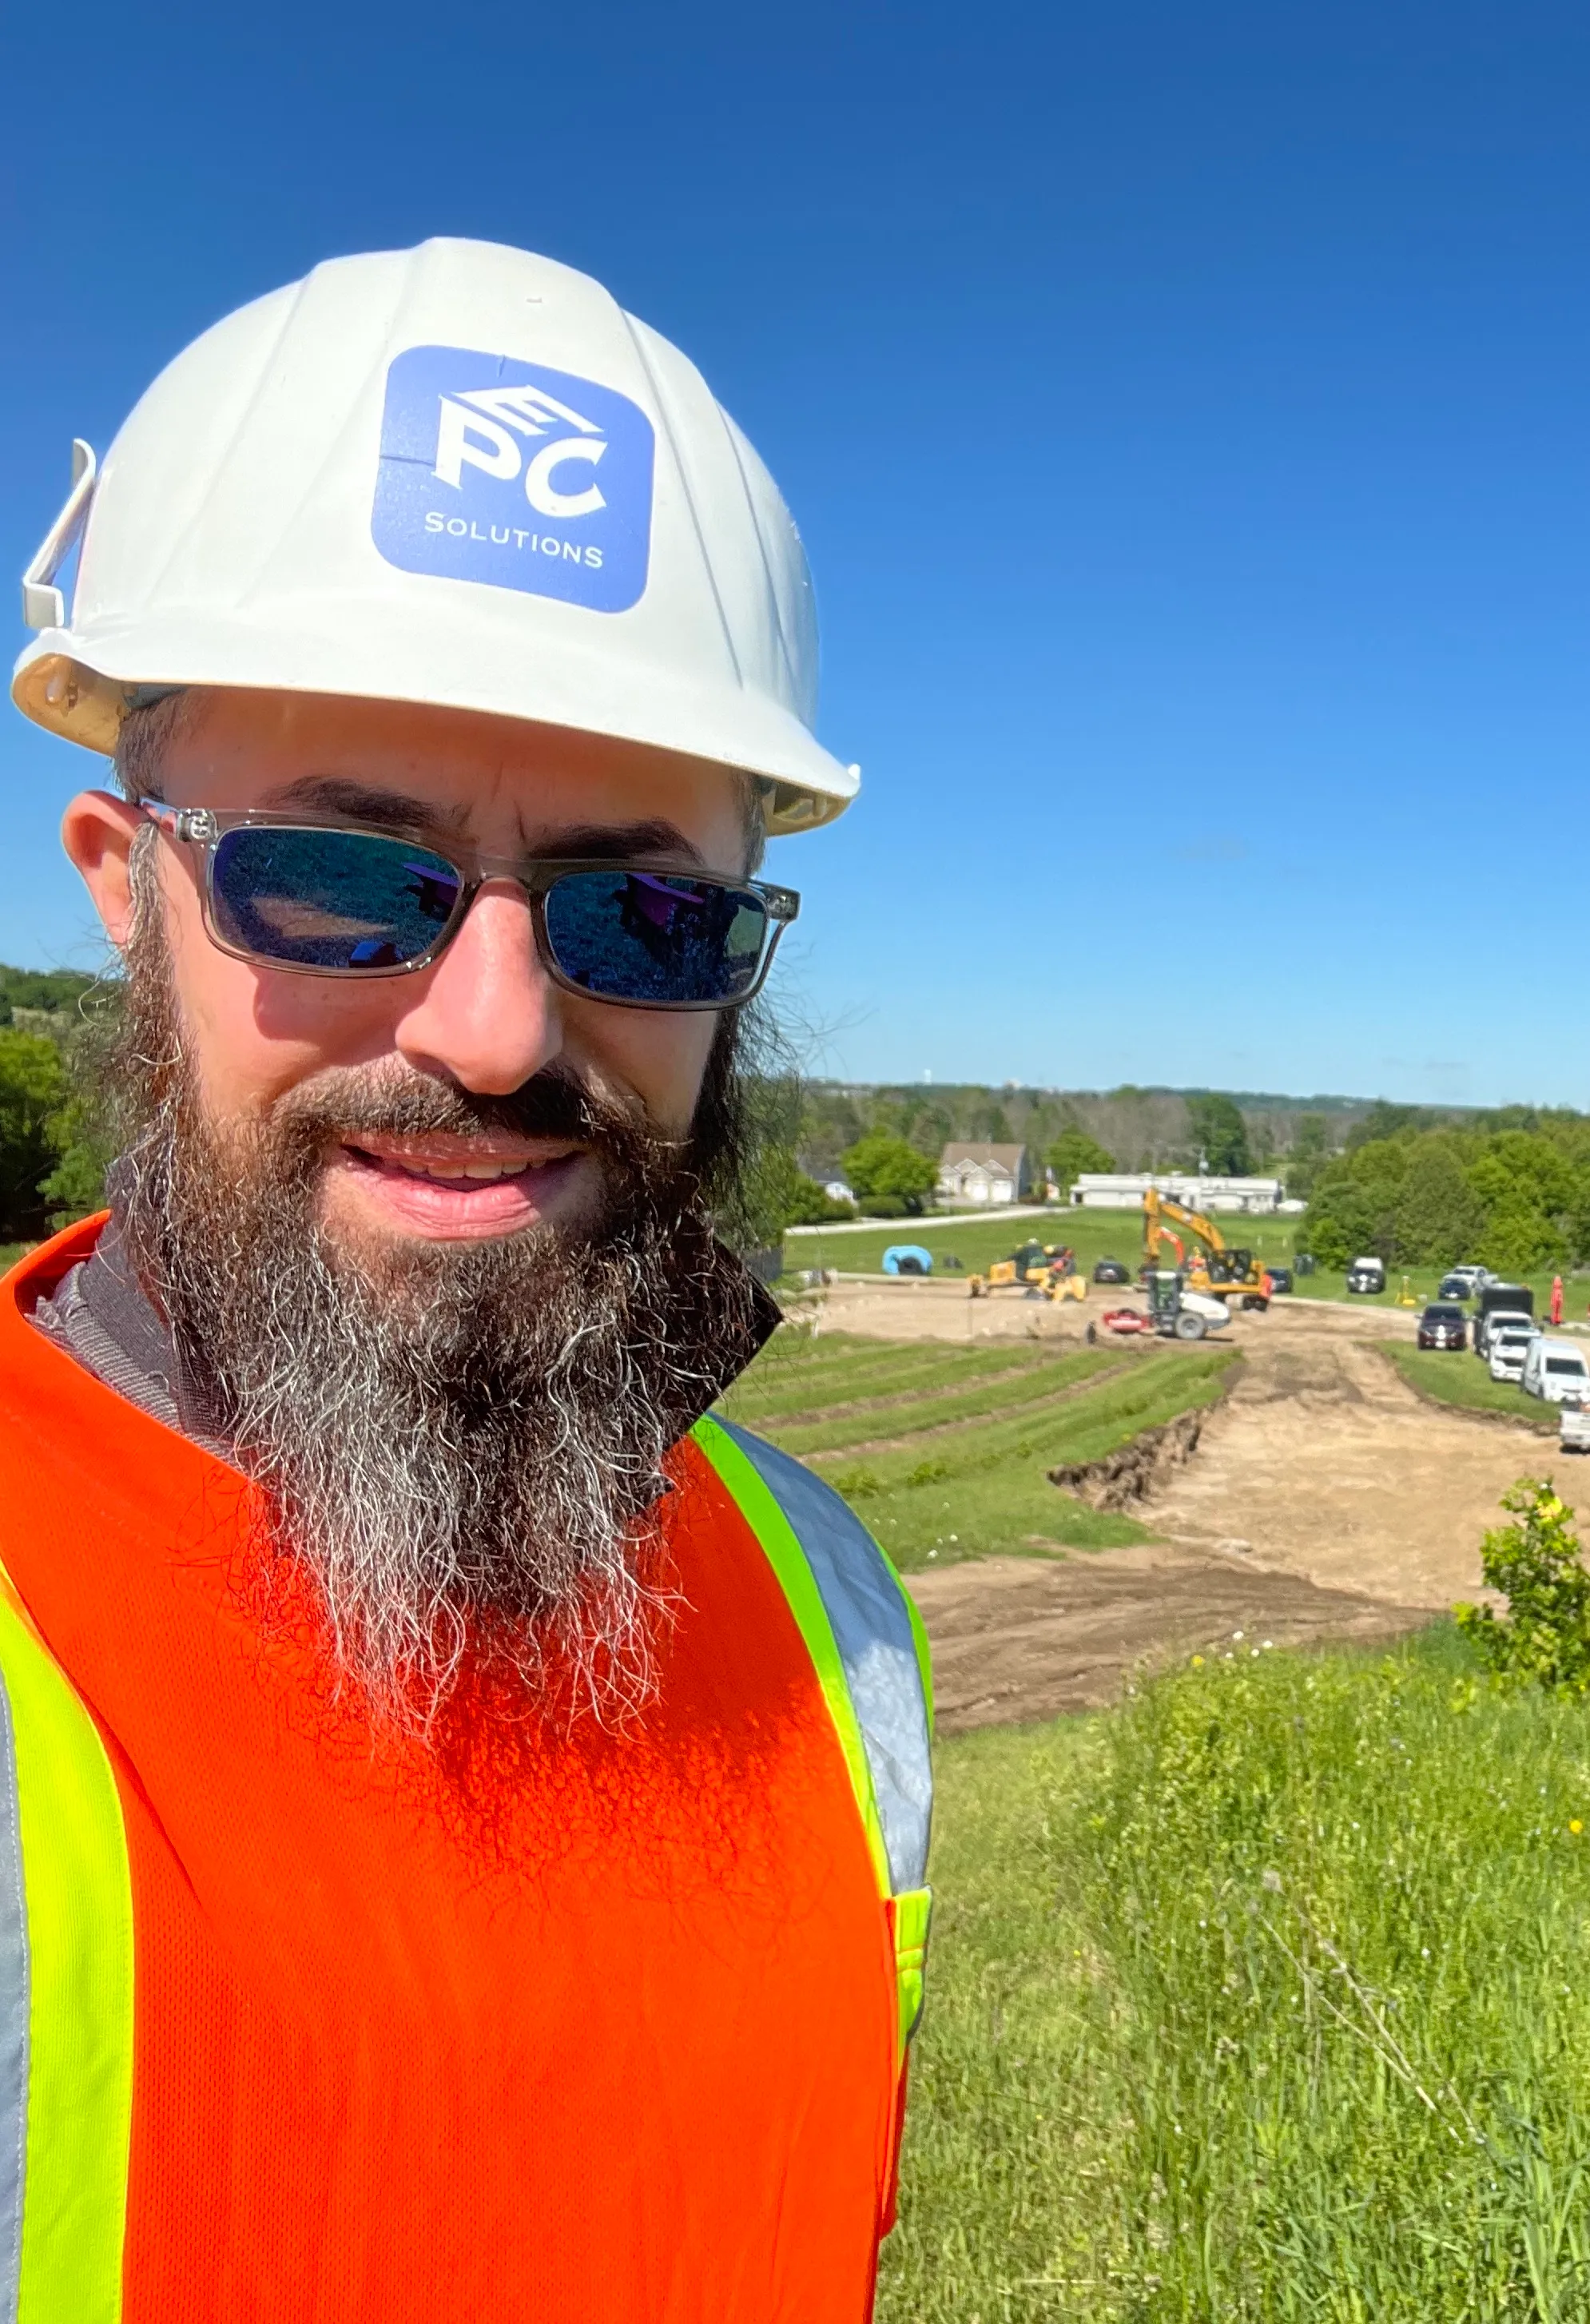 The owner of EPC Solutions, Yosef on a job site wearing a hard hat.